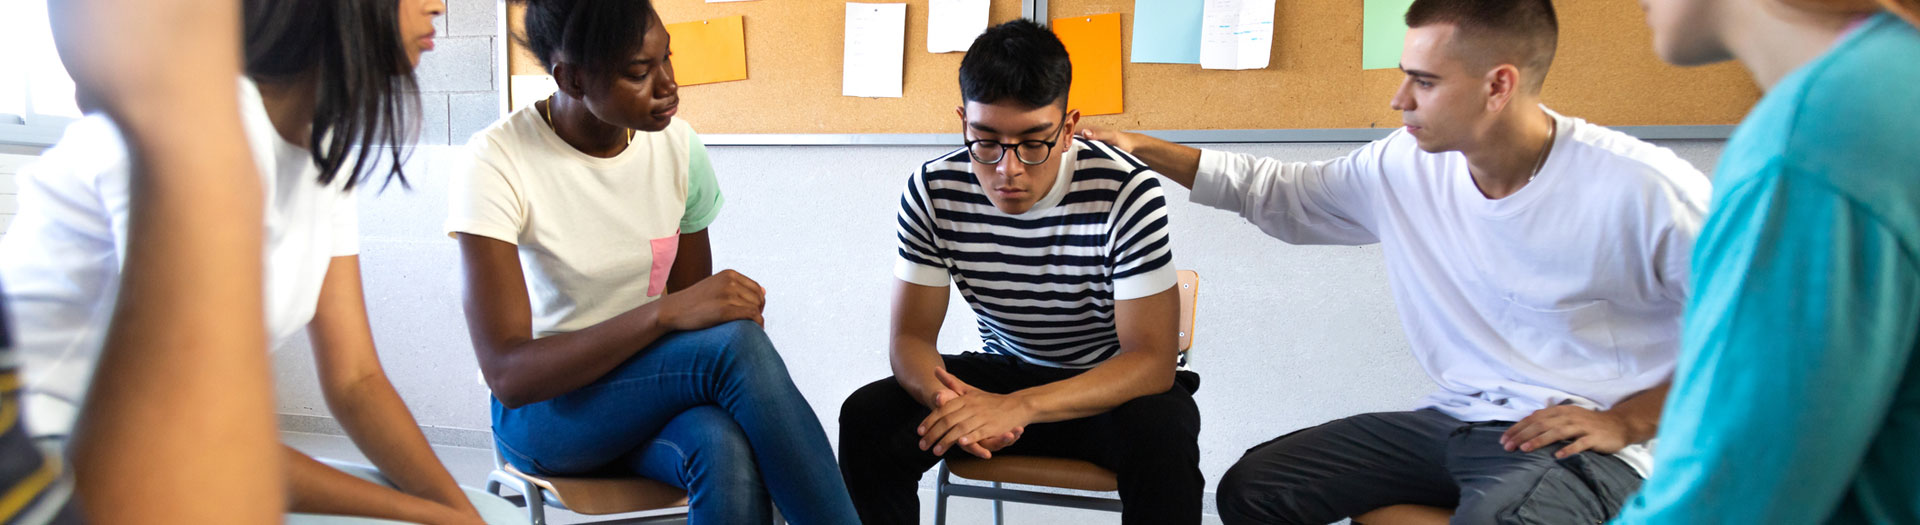 A diverse group of young adults seated in a circle, engaging in what appears to be a supportive discussion. One person in a striped shirt seems to be the focus of attention, looking down thoughtfully while another participant is placing a comforting hand on their shoulder.